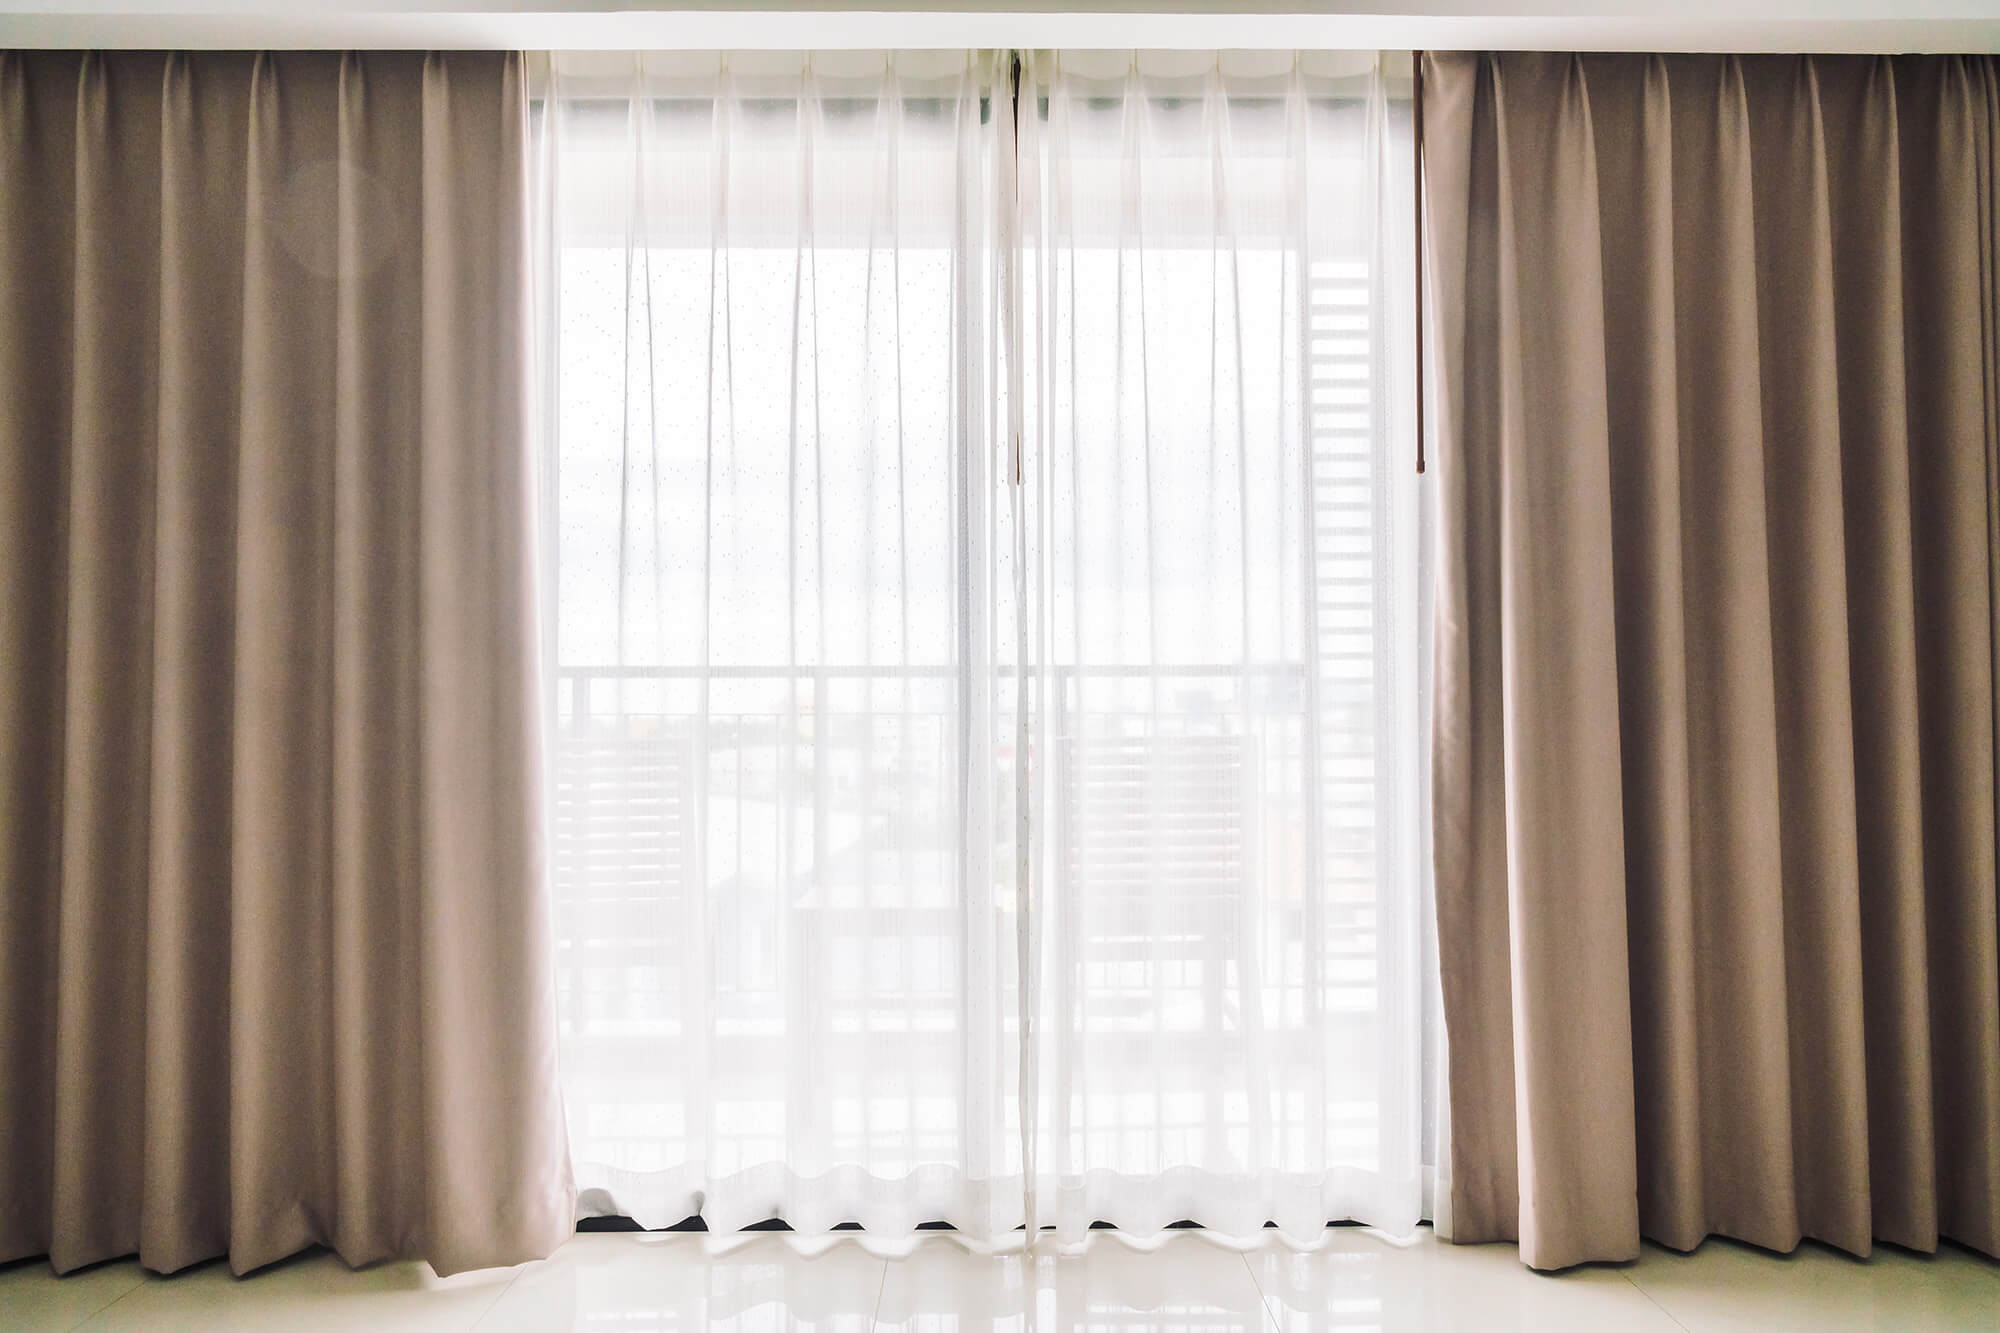 a large window with transparent white curtains and heavier tan curtains.